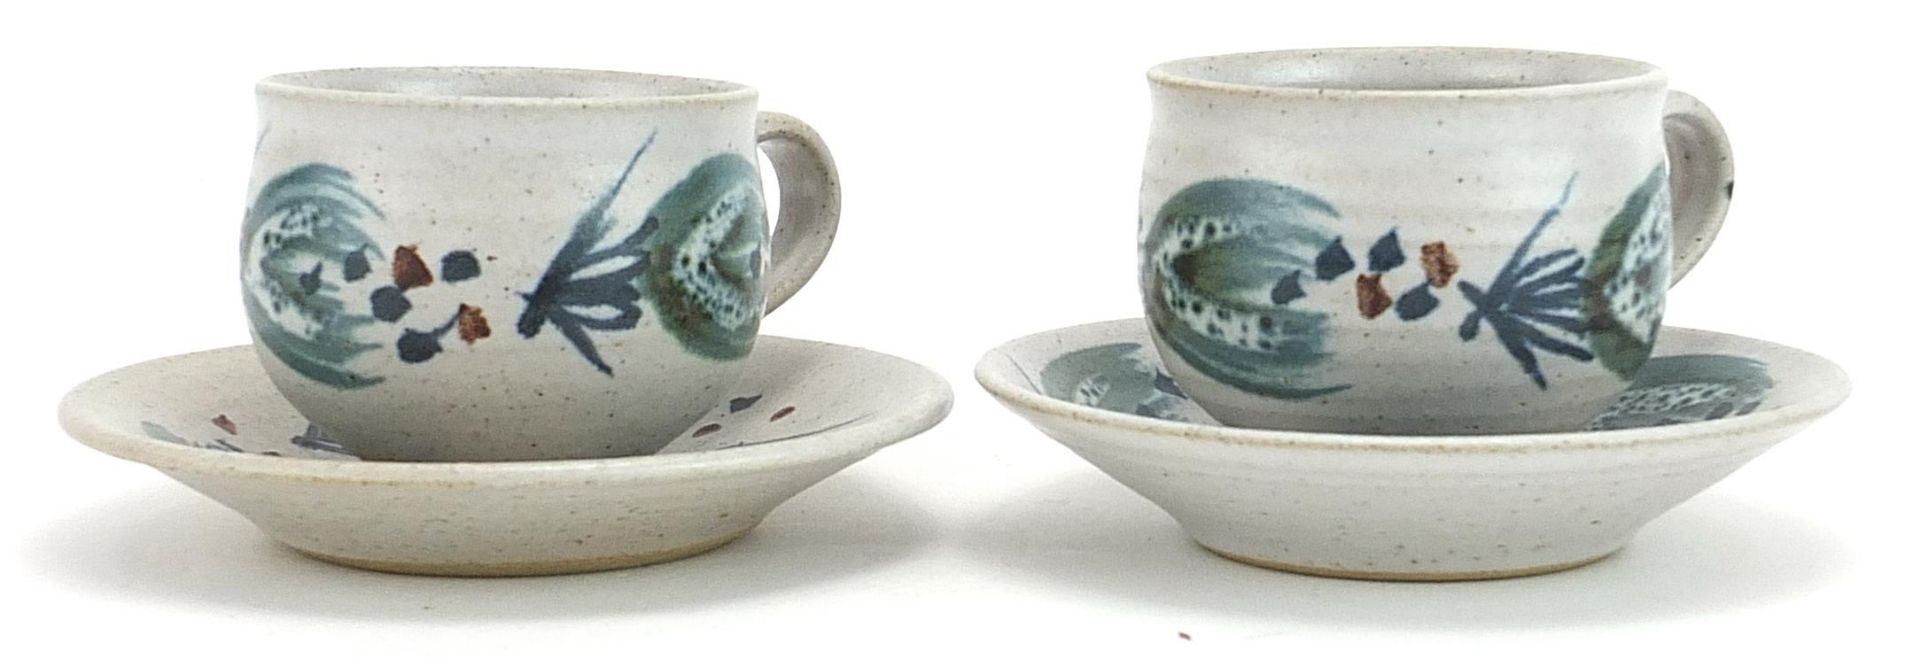 Marianne de Trey, pair of studio pottery cups and saucers hand painted with stylised motifs, - Image 2 of 3